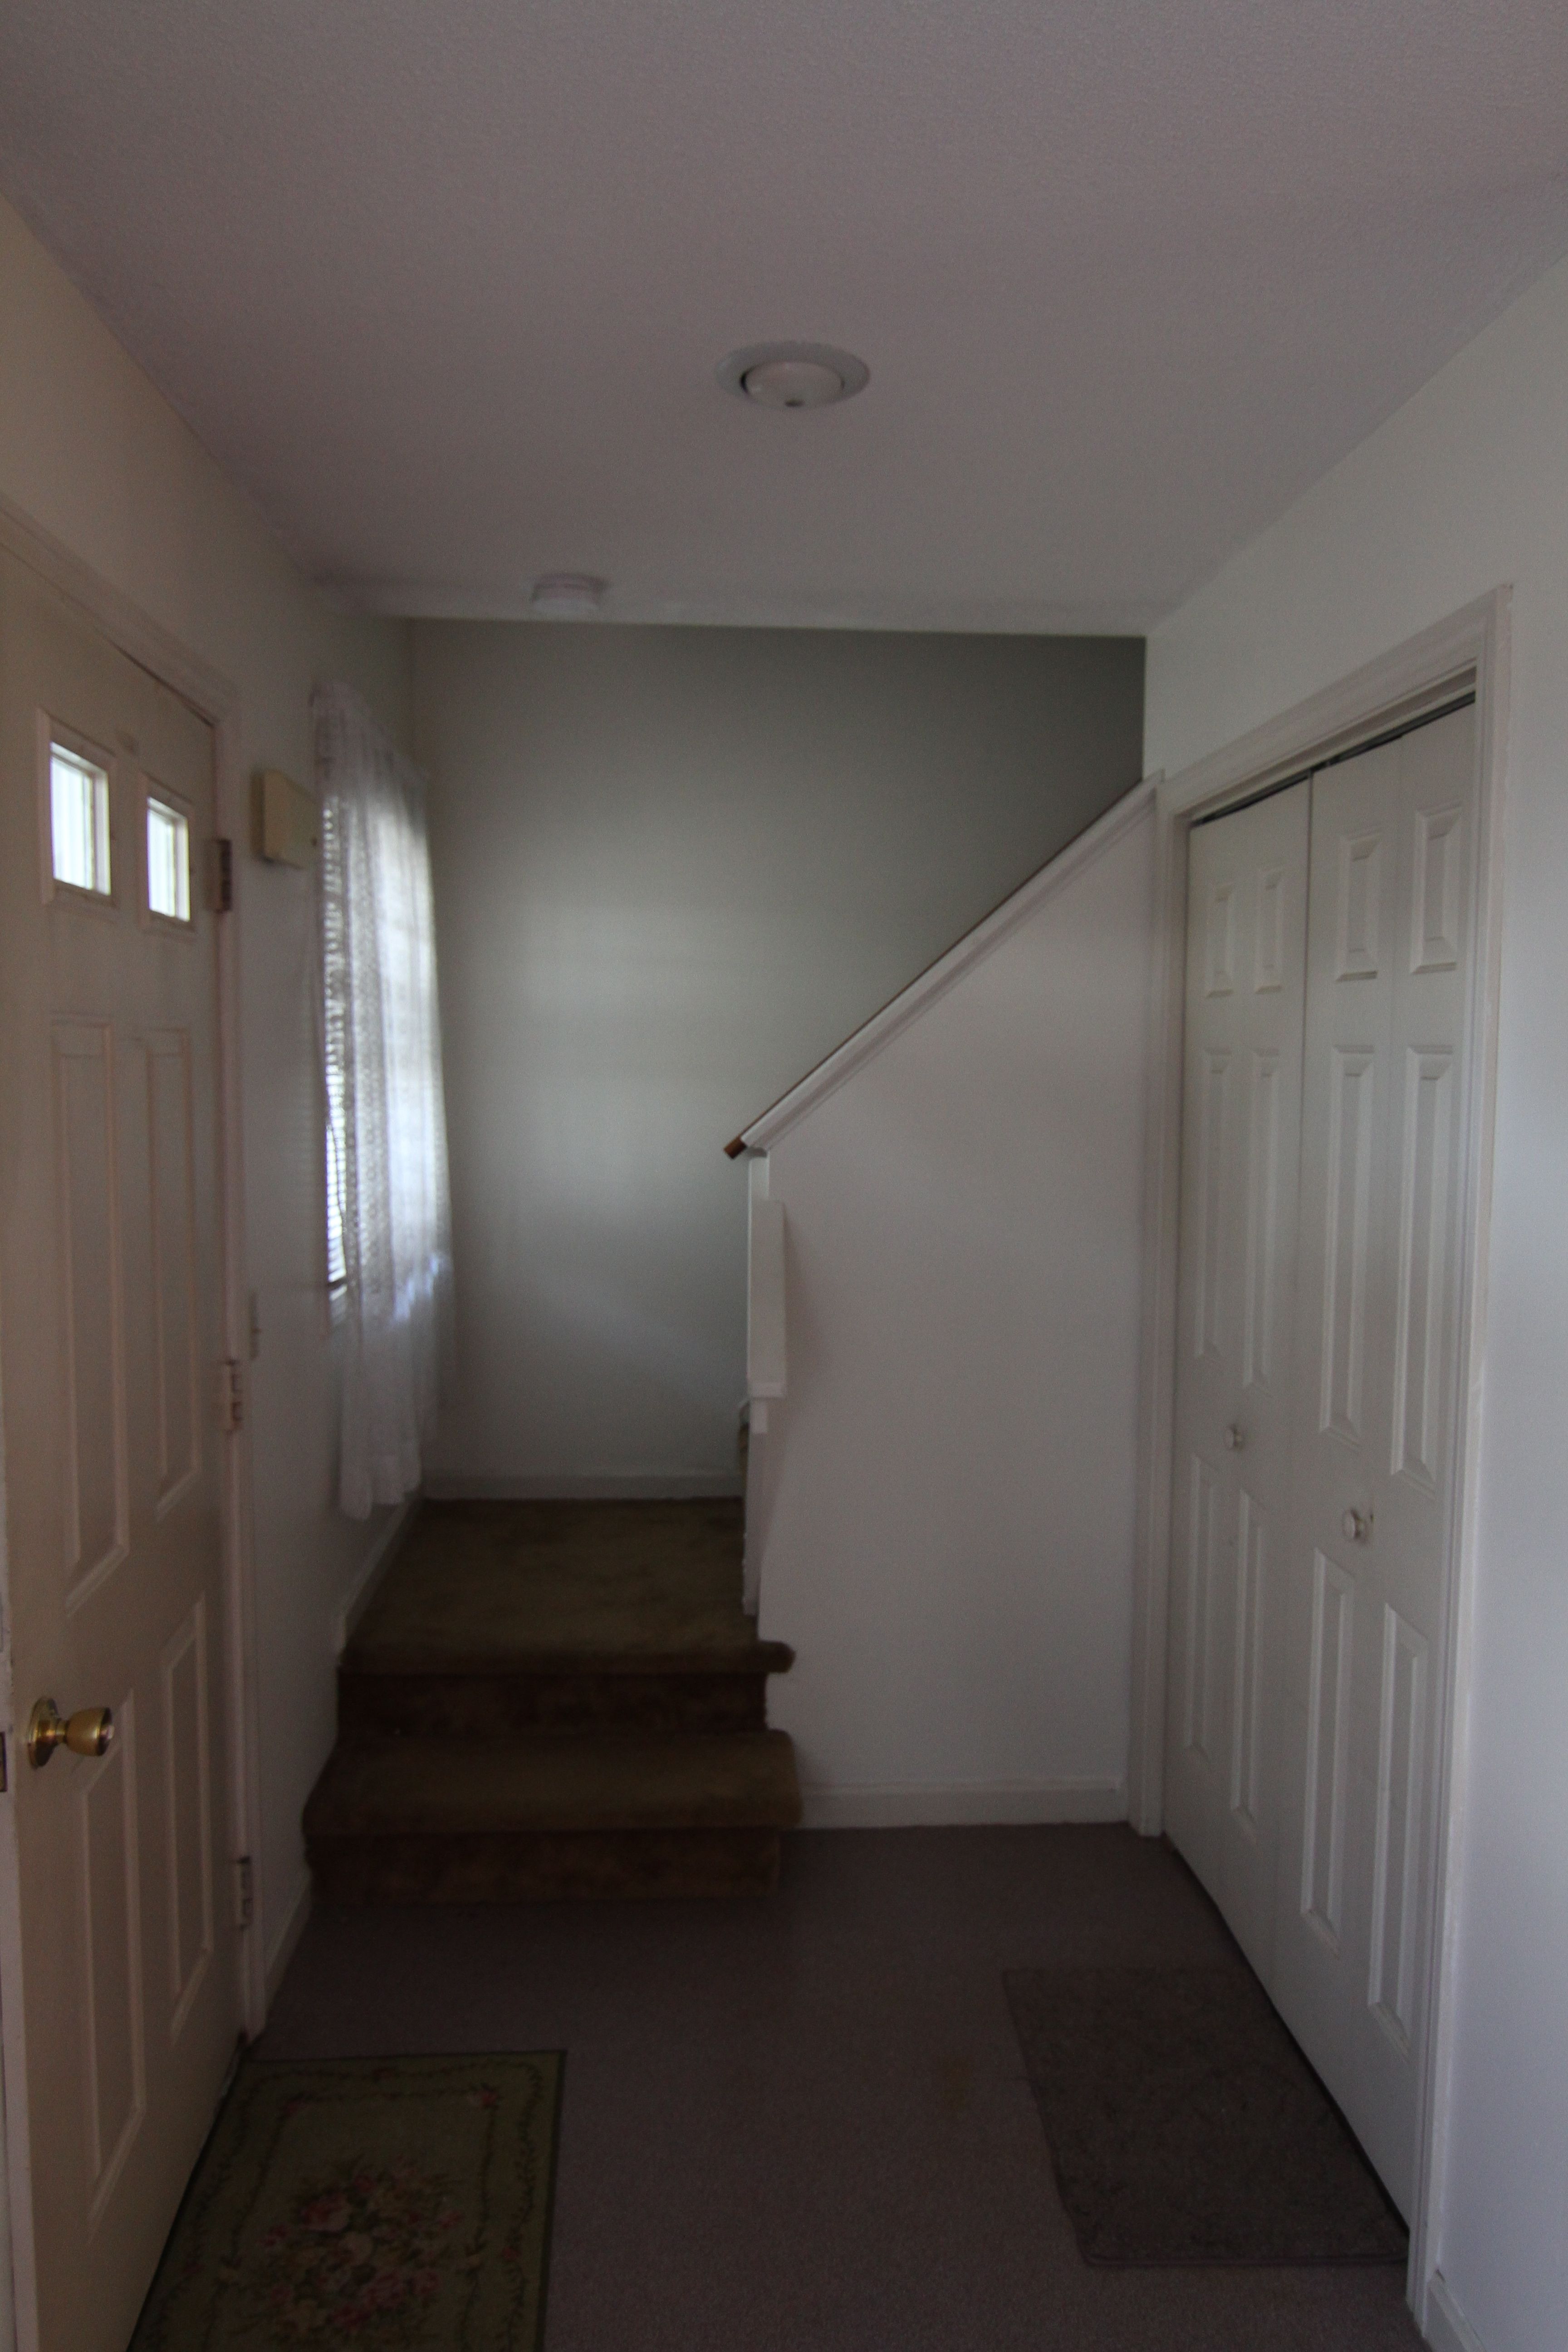 The entryway BEFORE: grungy, carpet and linoleum, needing a bit of paint and love.